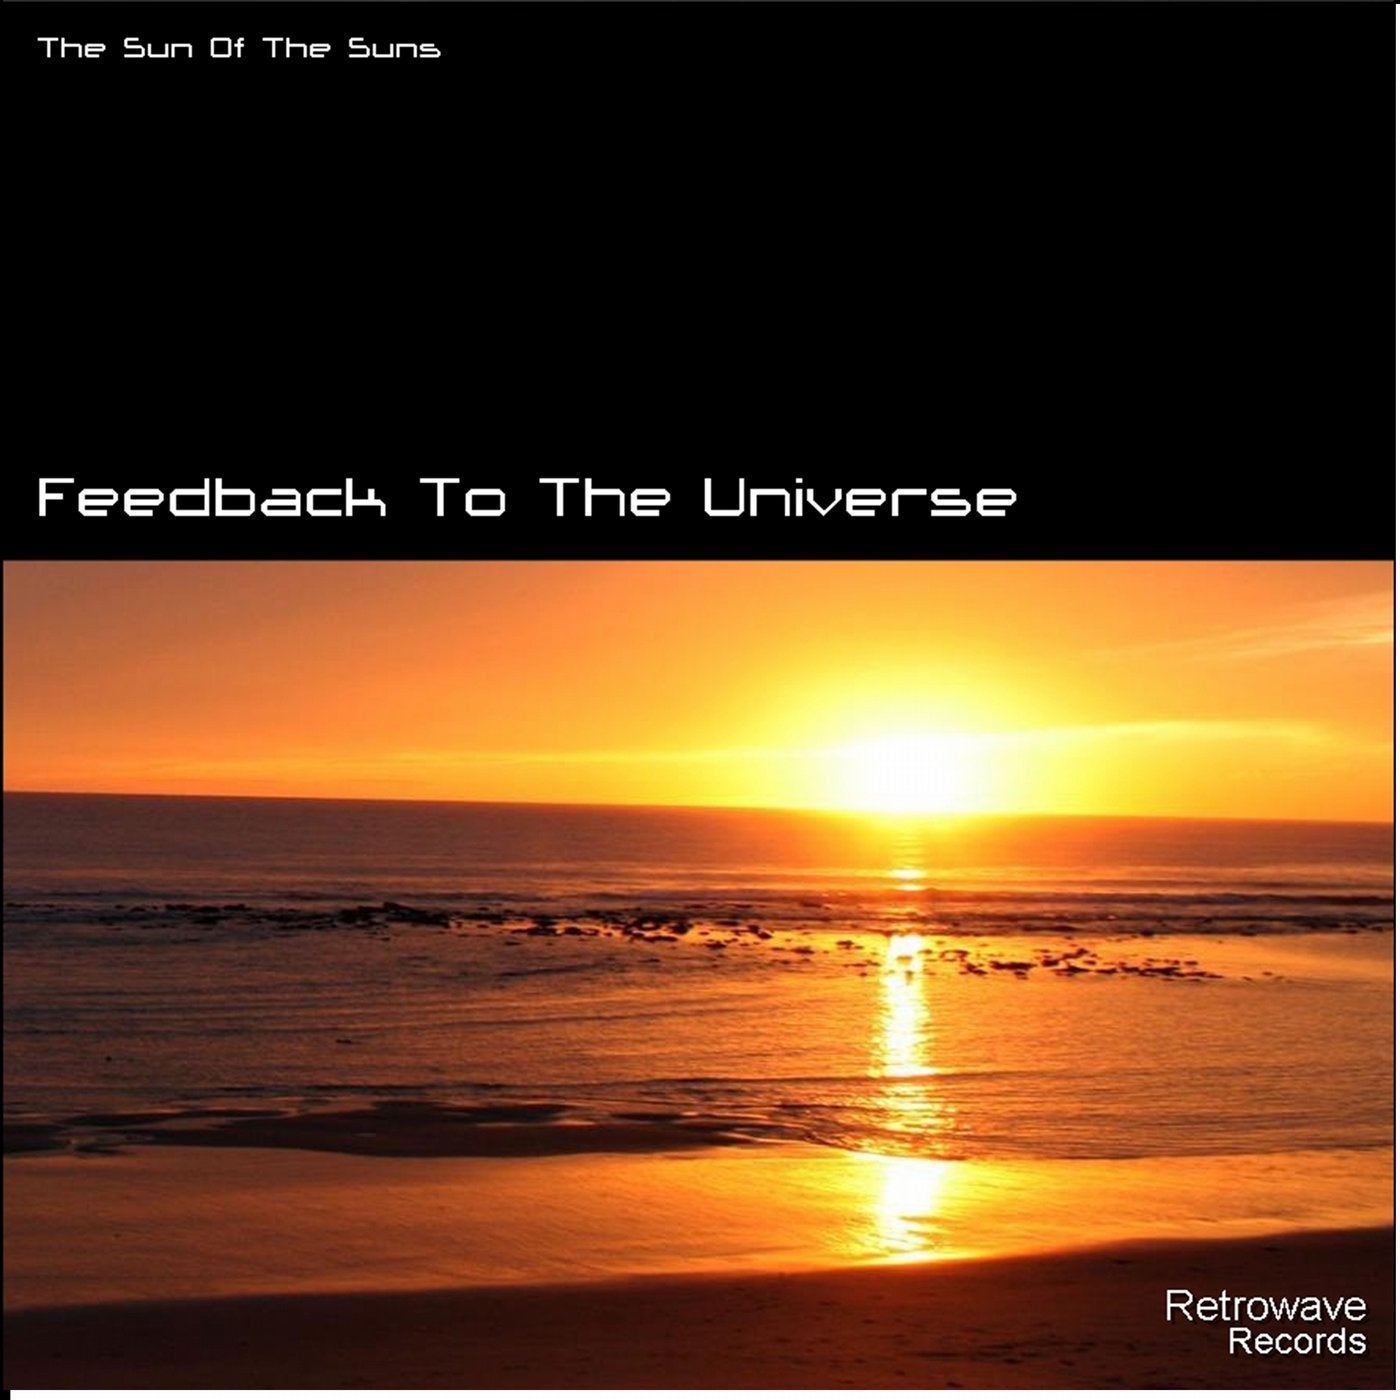 Feedback to the Universe